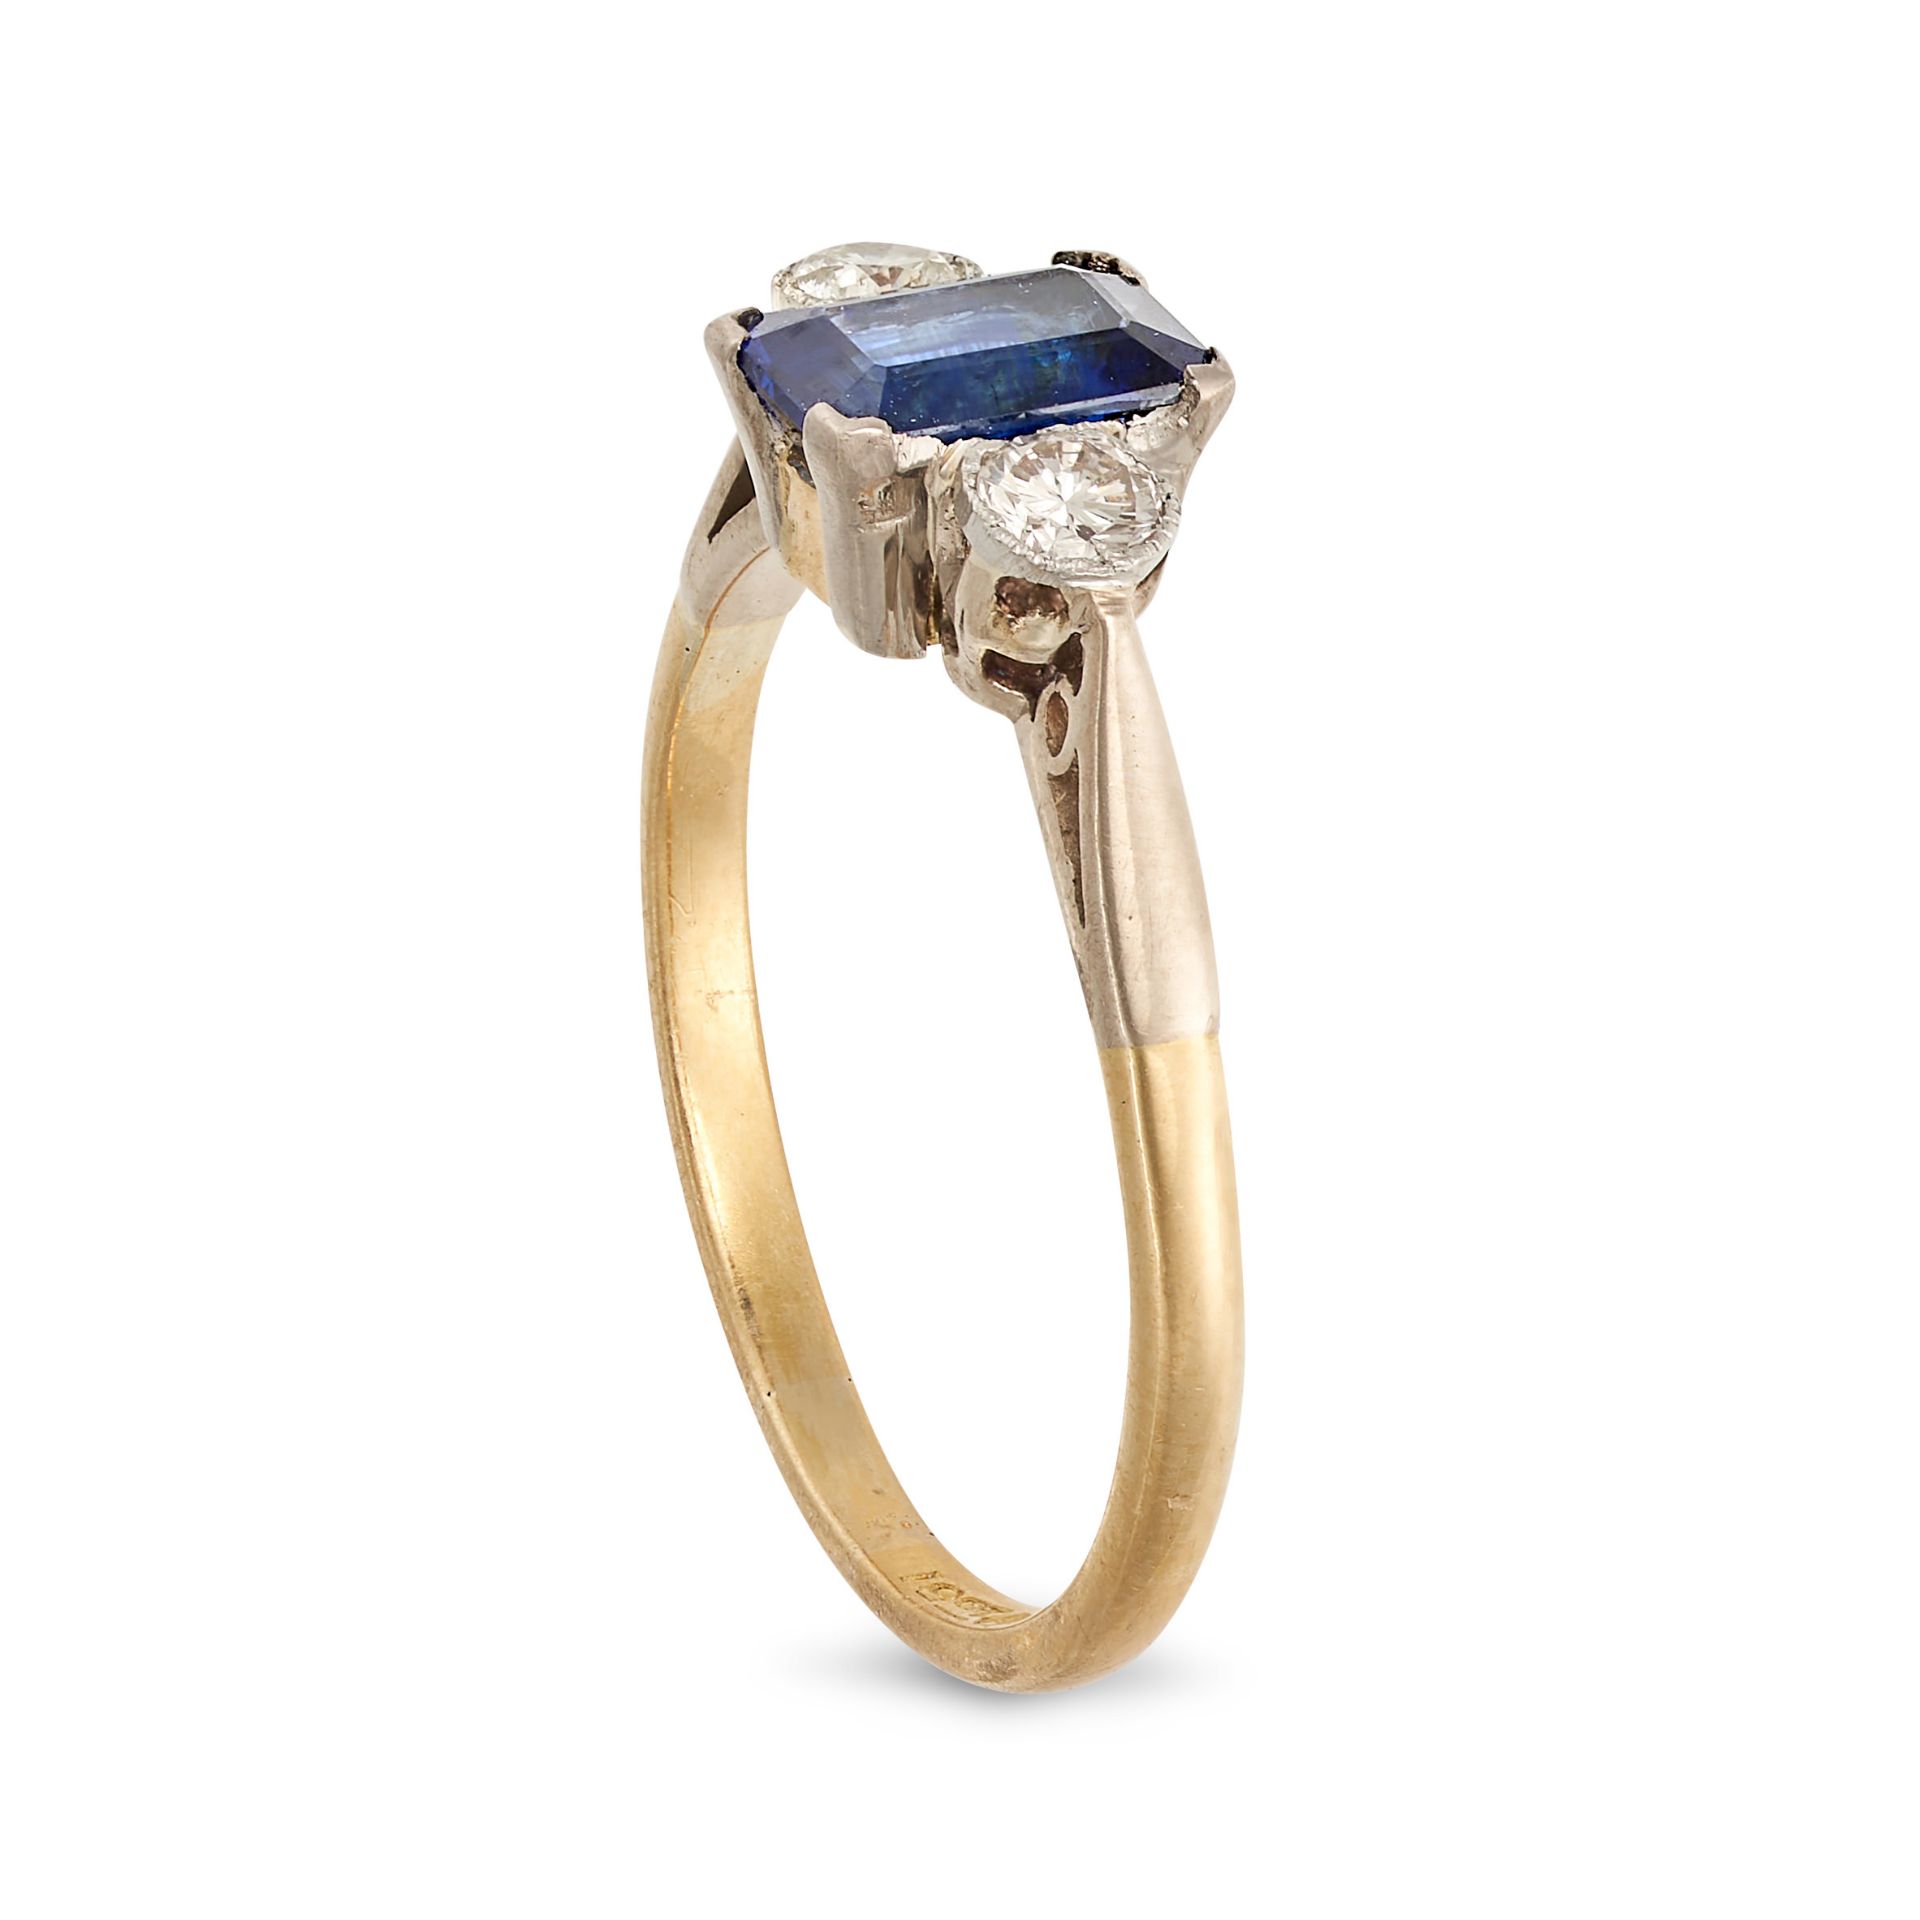 A SAPPHIRE AND DIAMOND THREE STONE RING in 18ct yellow gold and platinum, set with a rectangular ... - Image 2 of 2